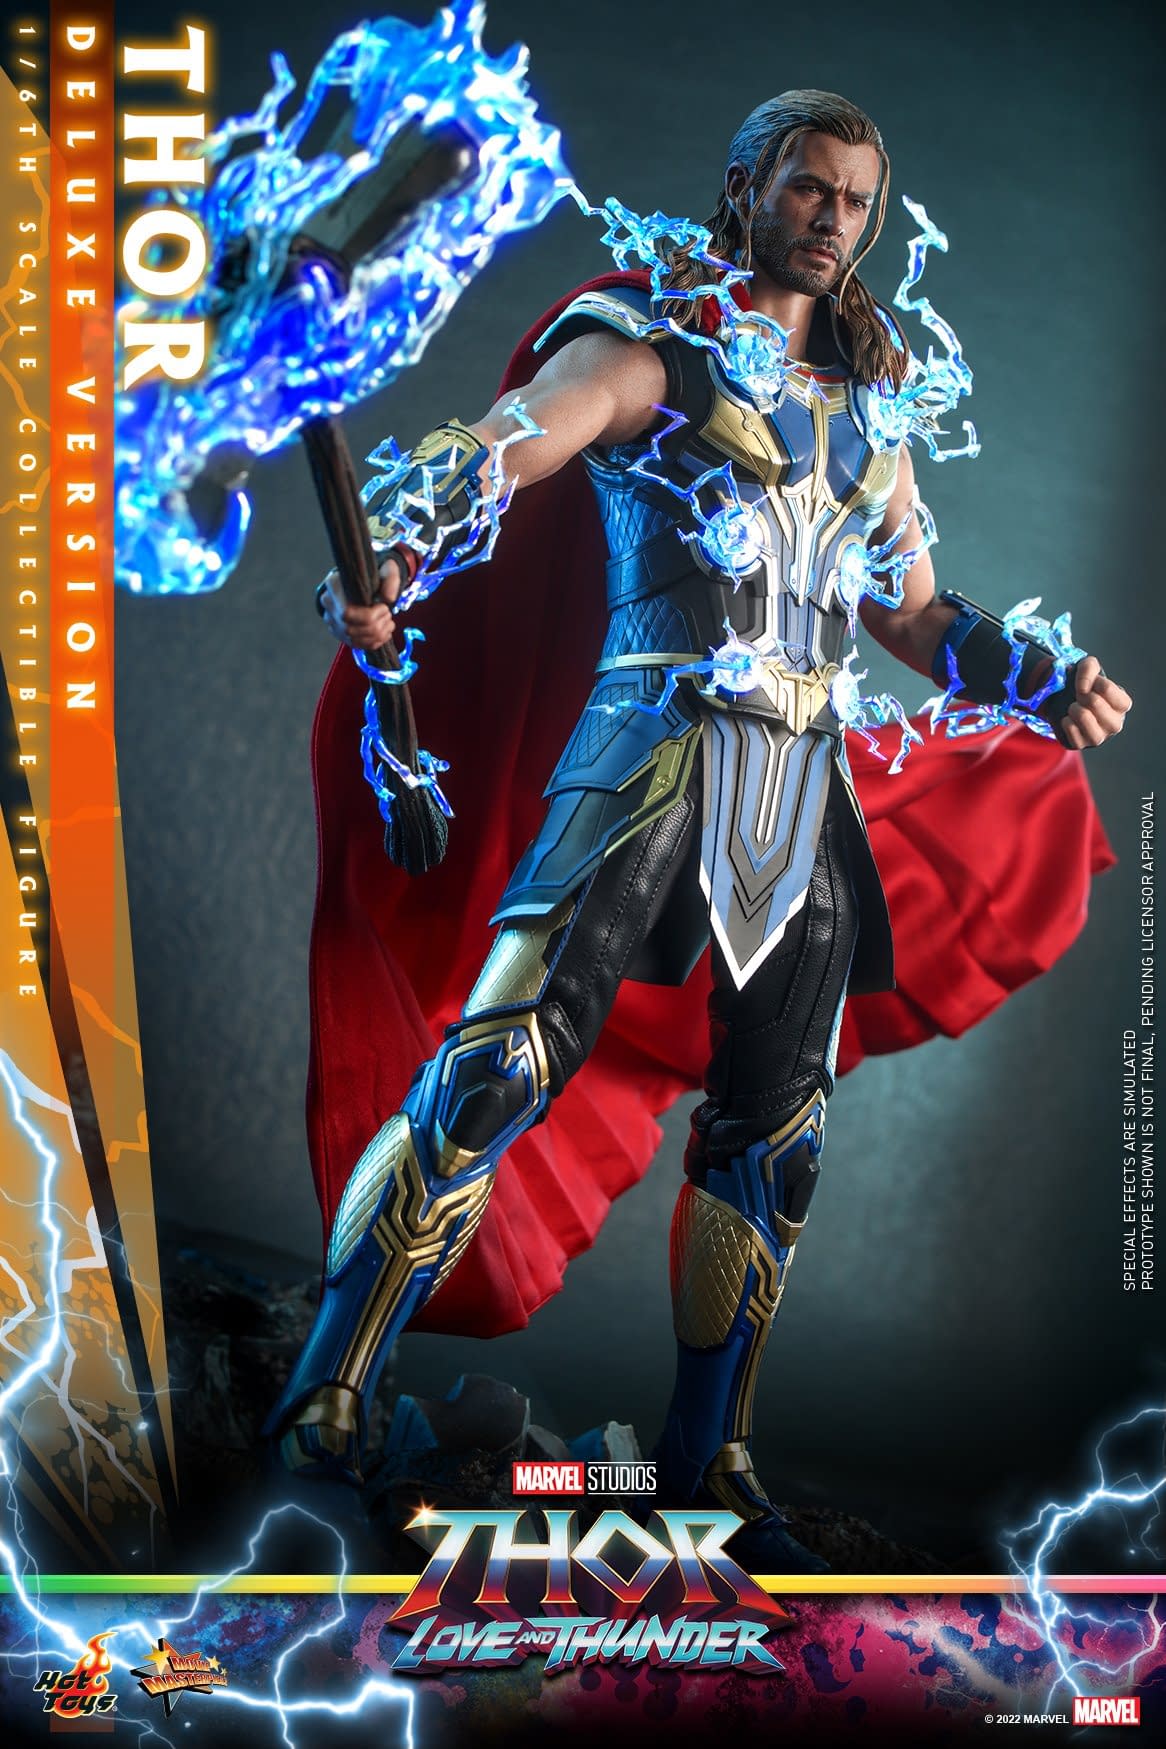 Hot Toys Brings Home the Storm with Thor: Love and Thunder 